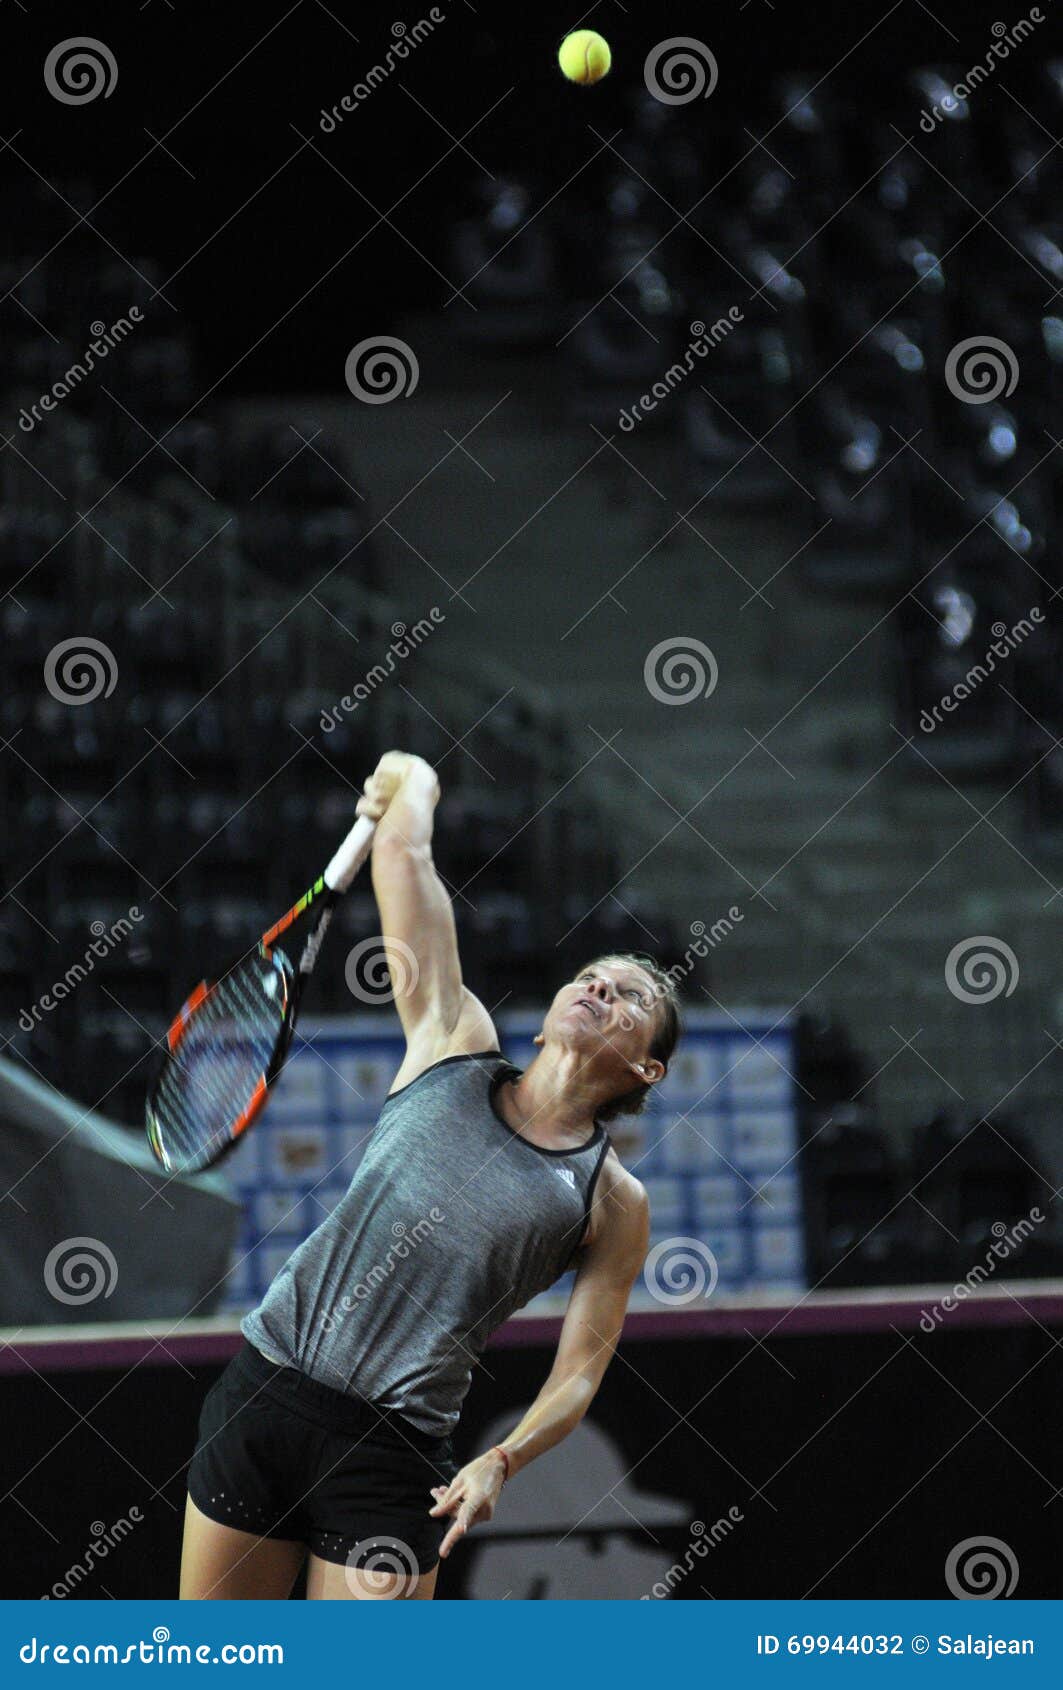 18 Wta Tennis Live Ranking Images, Stock Photos, 3D objects, & Vectors